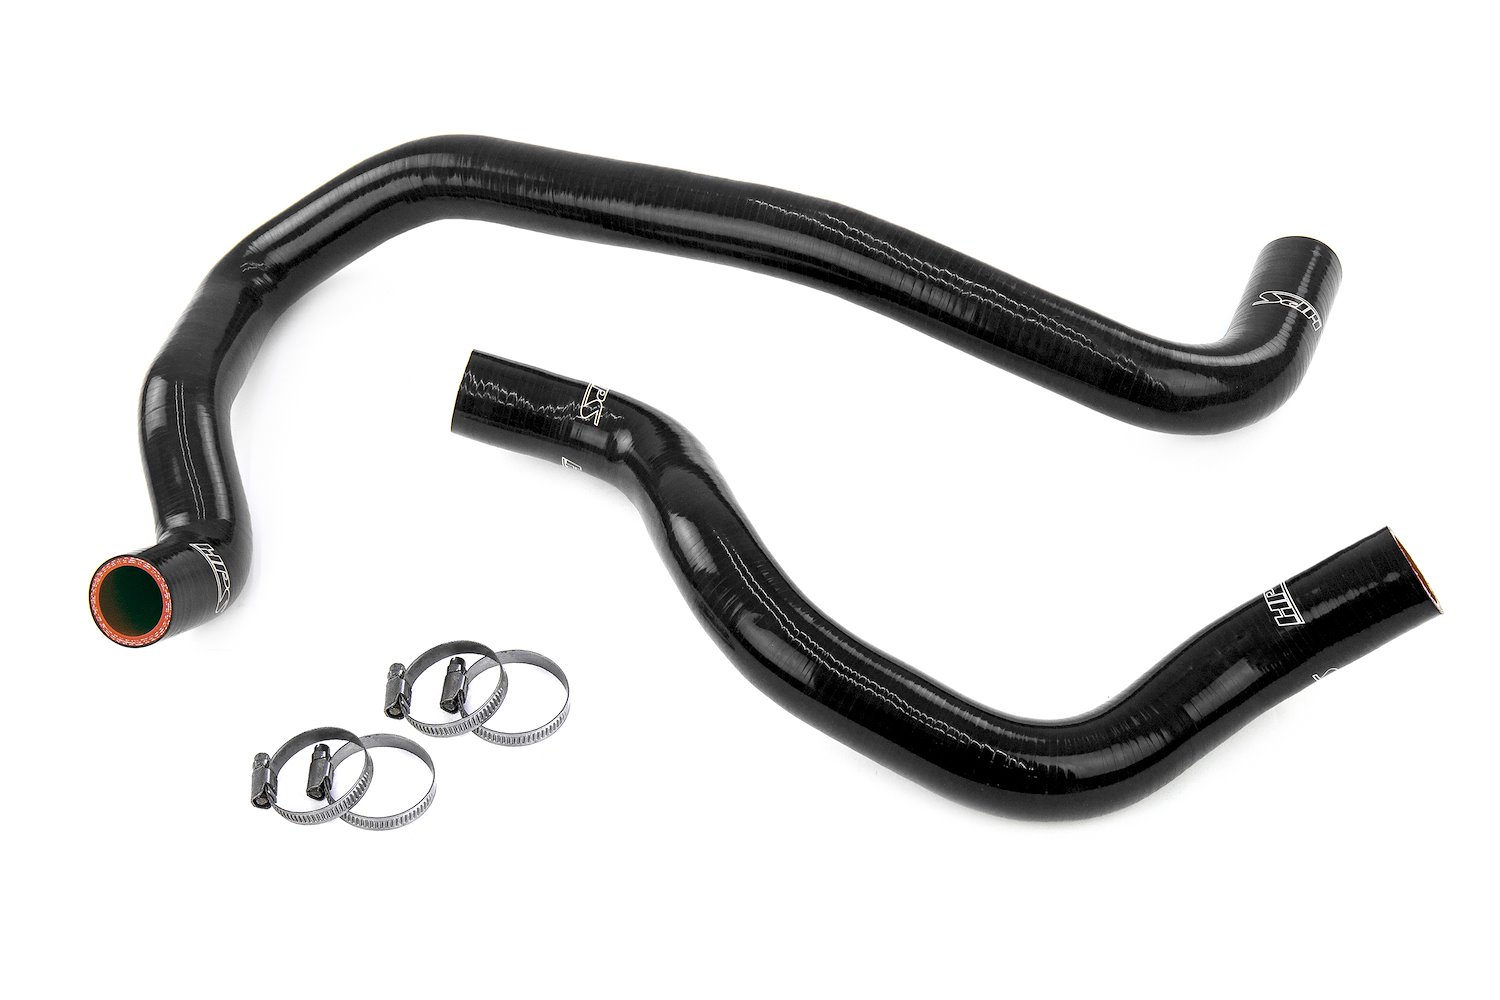 57-2048-BLK Radiator Hose Kit, 3-Ply Reinforced Silicone, Replaces Rubber Radiator Coolant Hoses